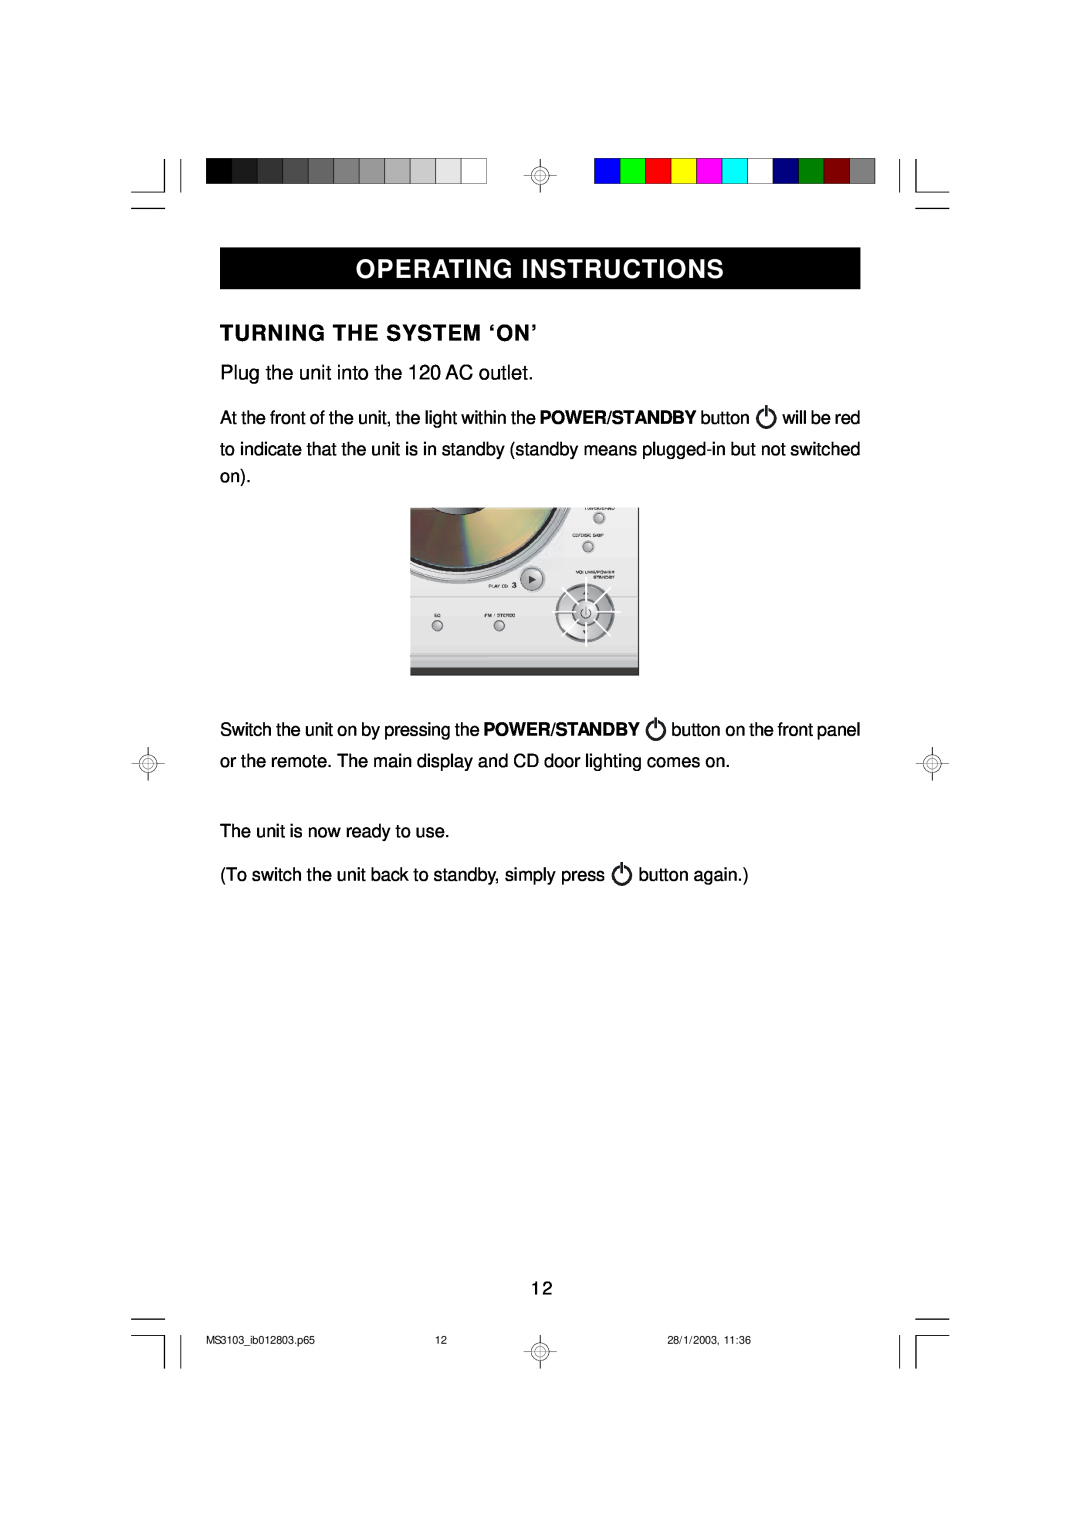 Emerson MS3103 owner manual Operating Instructions, Turning The System ‘On’, Plug the unit into the 120 AC outlet 